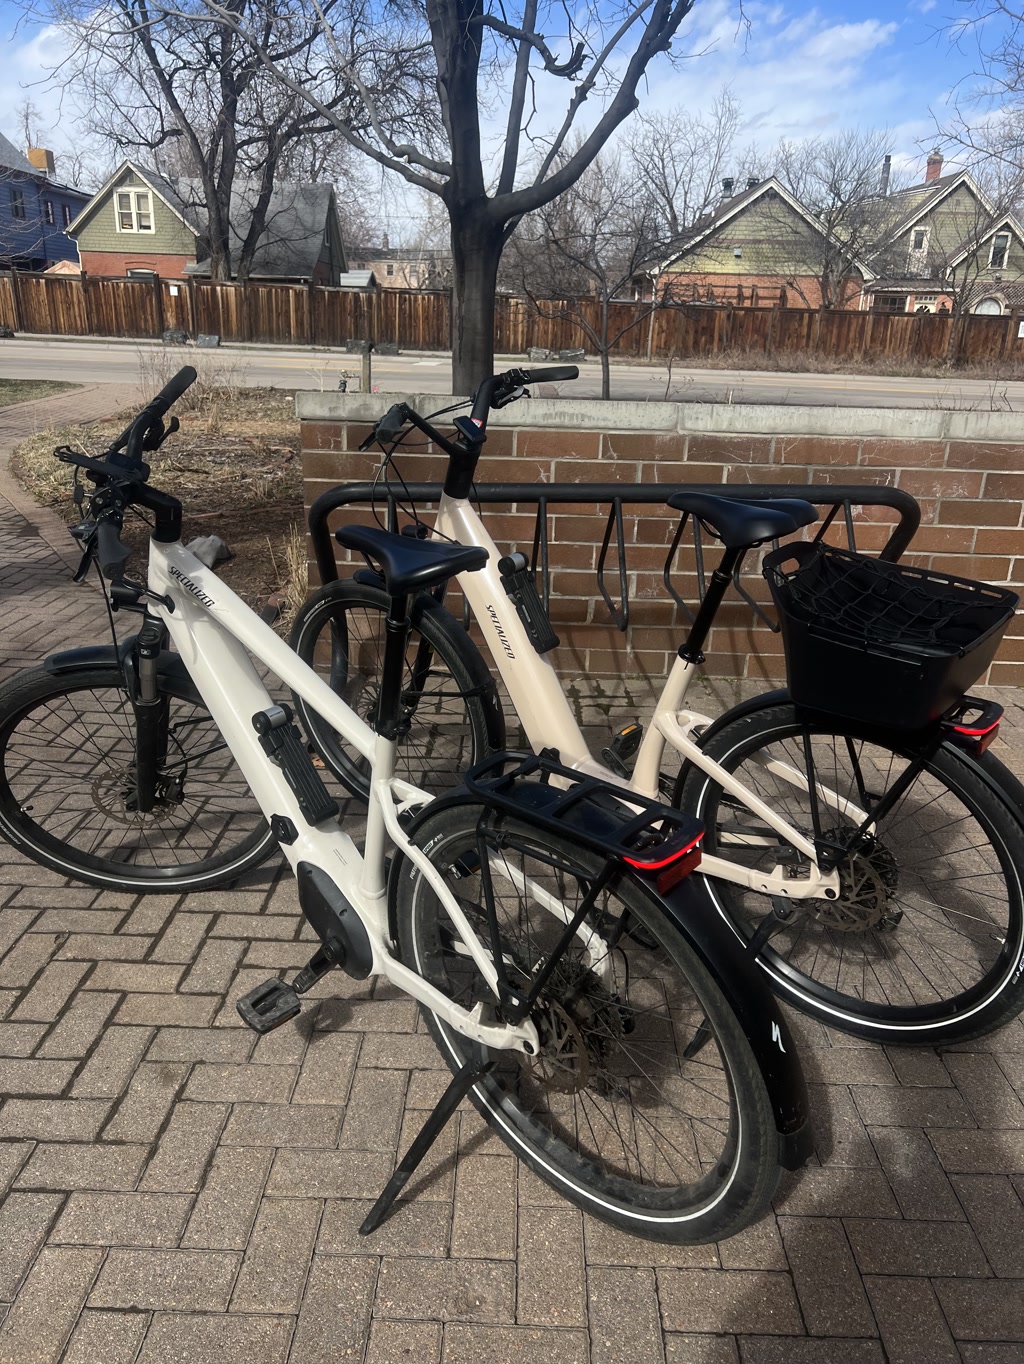 Two electric bicycles are parked side by side, locked to a bike rack. These bikes feature a sleek, modern design with primarily white frames accented by black components. Both are equipped with rear cargo racks, and one has a black basket attached to it. The handlebars show a clear design with ergonomic grips and straightforward controls, indicating a user-friendly interface. The setting is outdoors with a brick pavement, and in the background, there are bare trees and a wooden fence behind which residential houses can be seen.